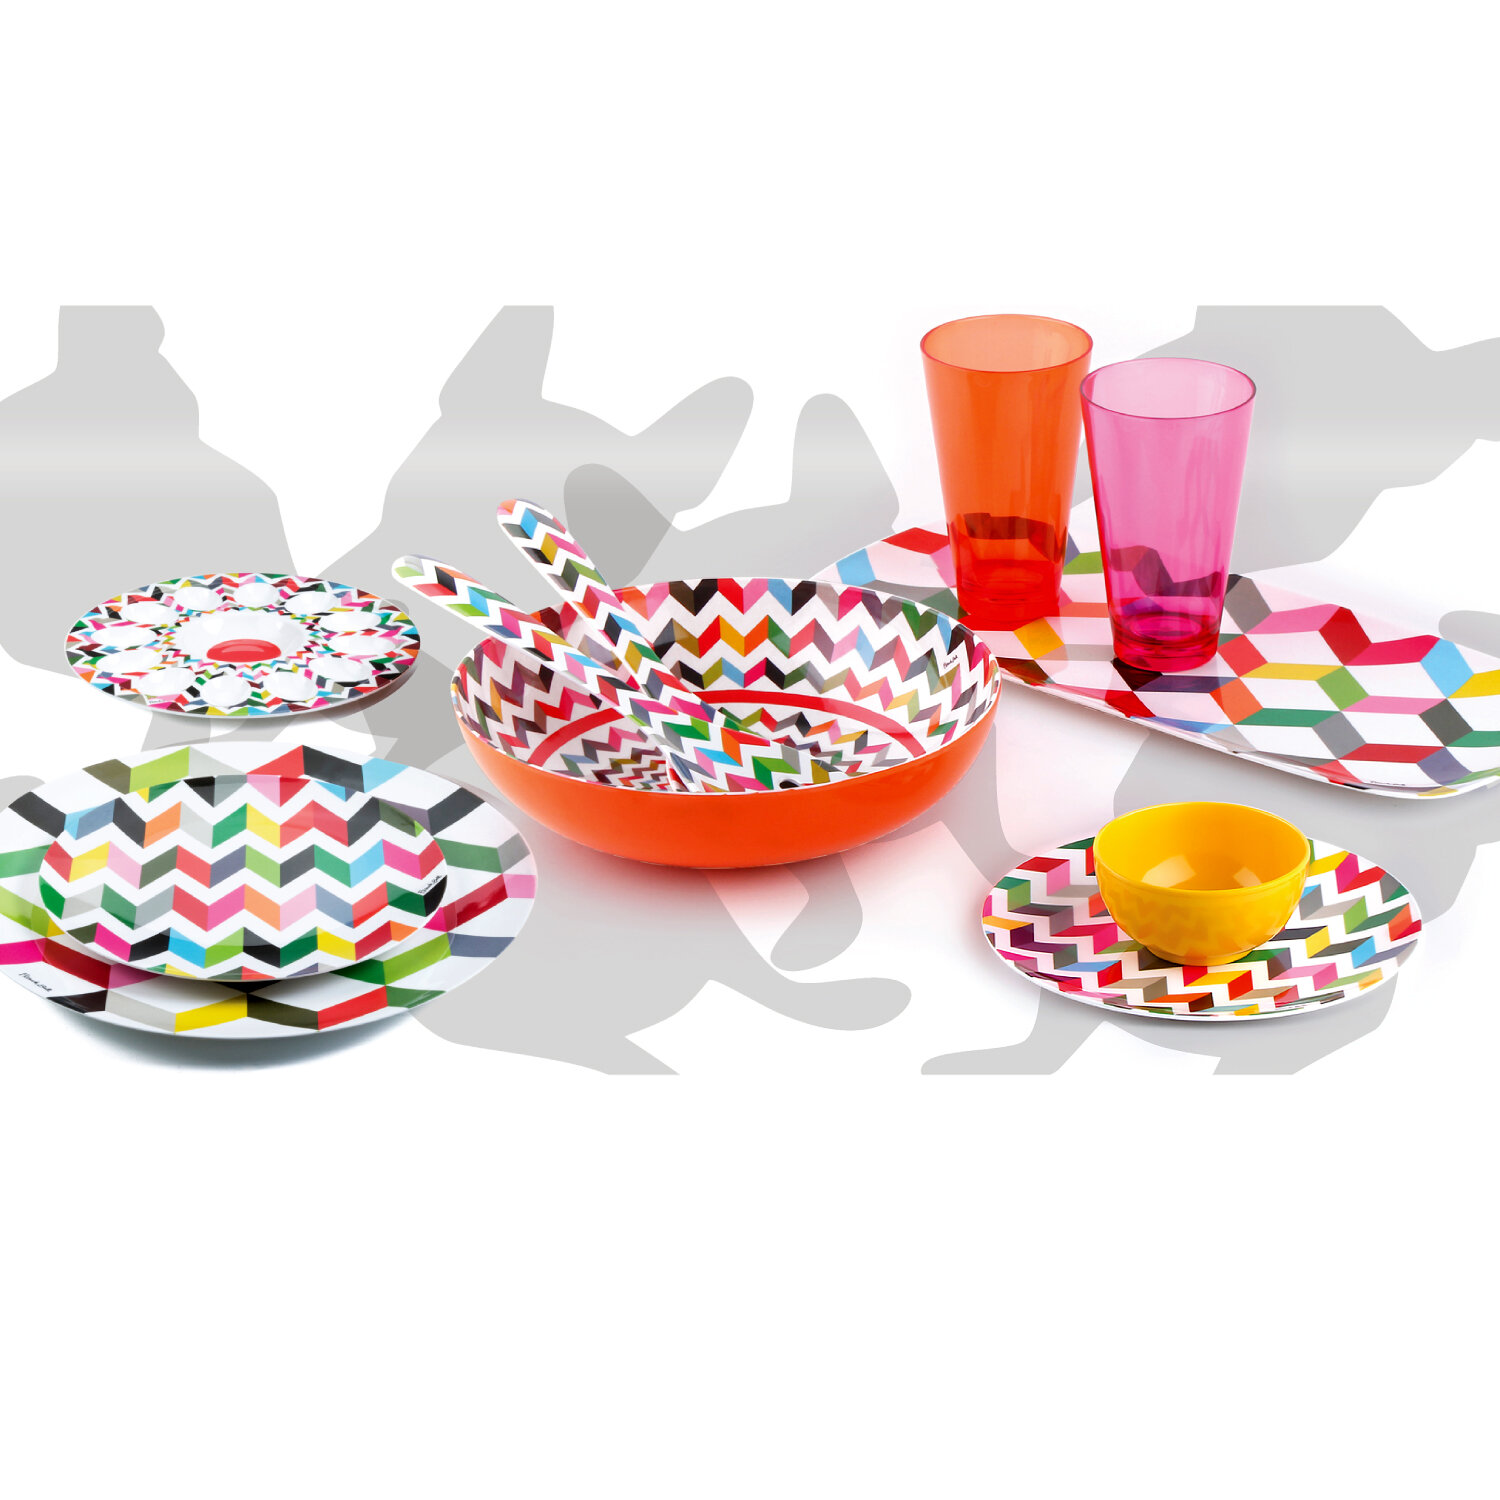  Composite image of French Bull‘s tableware and pattern background using Photoshop and Illustrator 